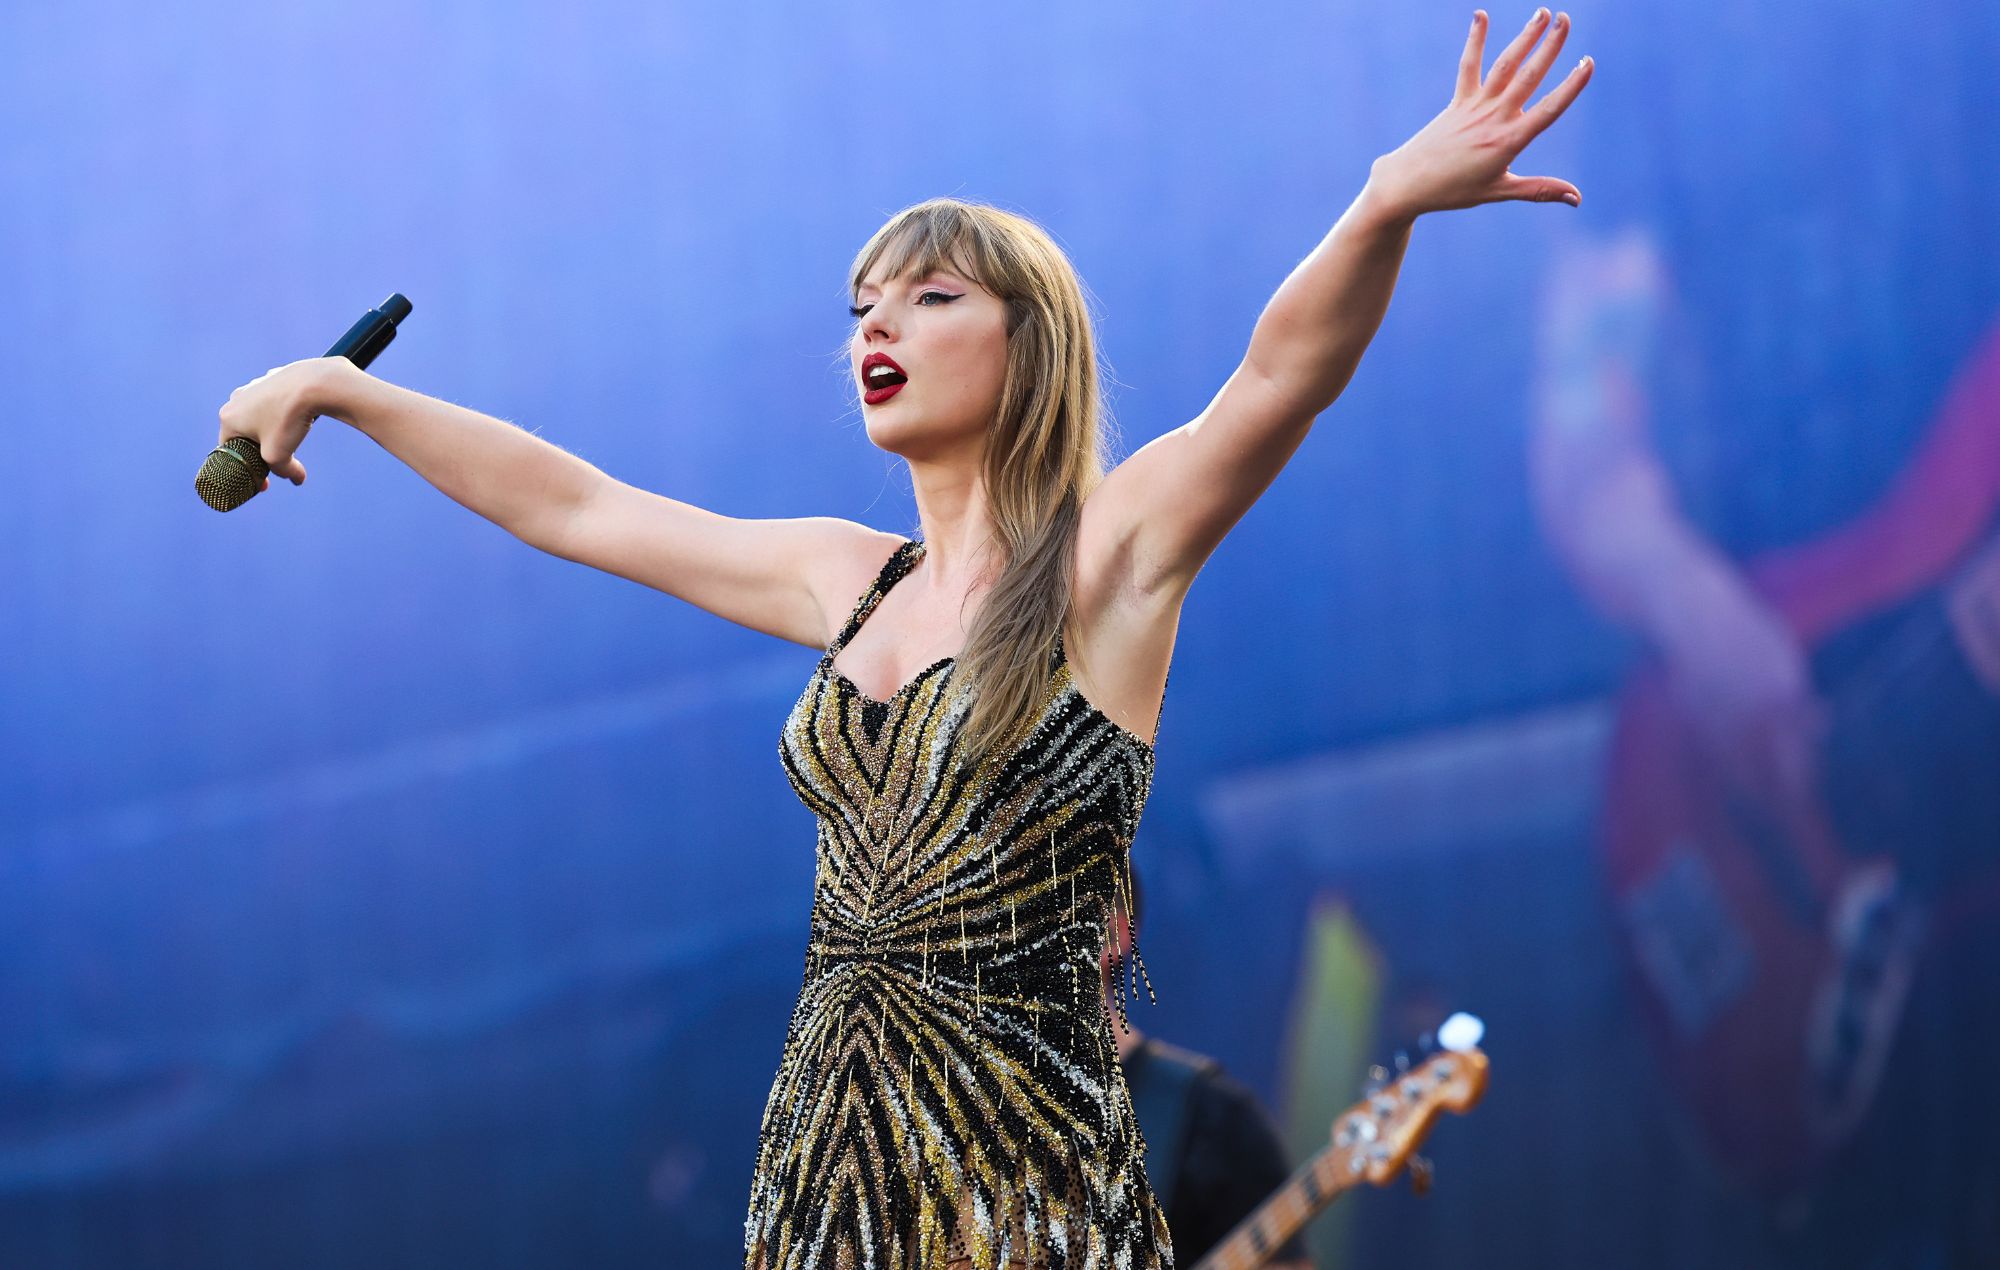 London V&A recruits four Taylor Swift superfans to advise on new exhibition